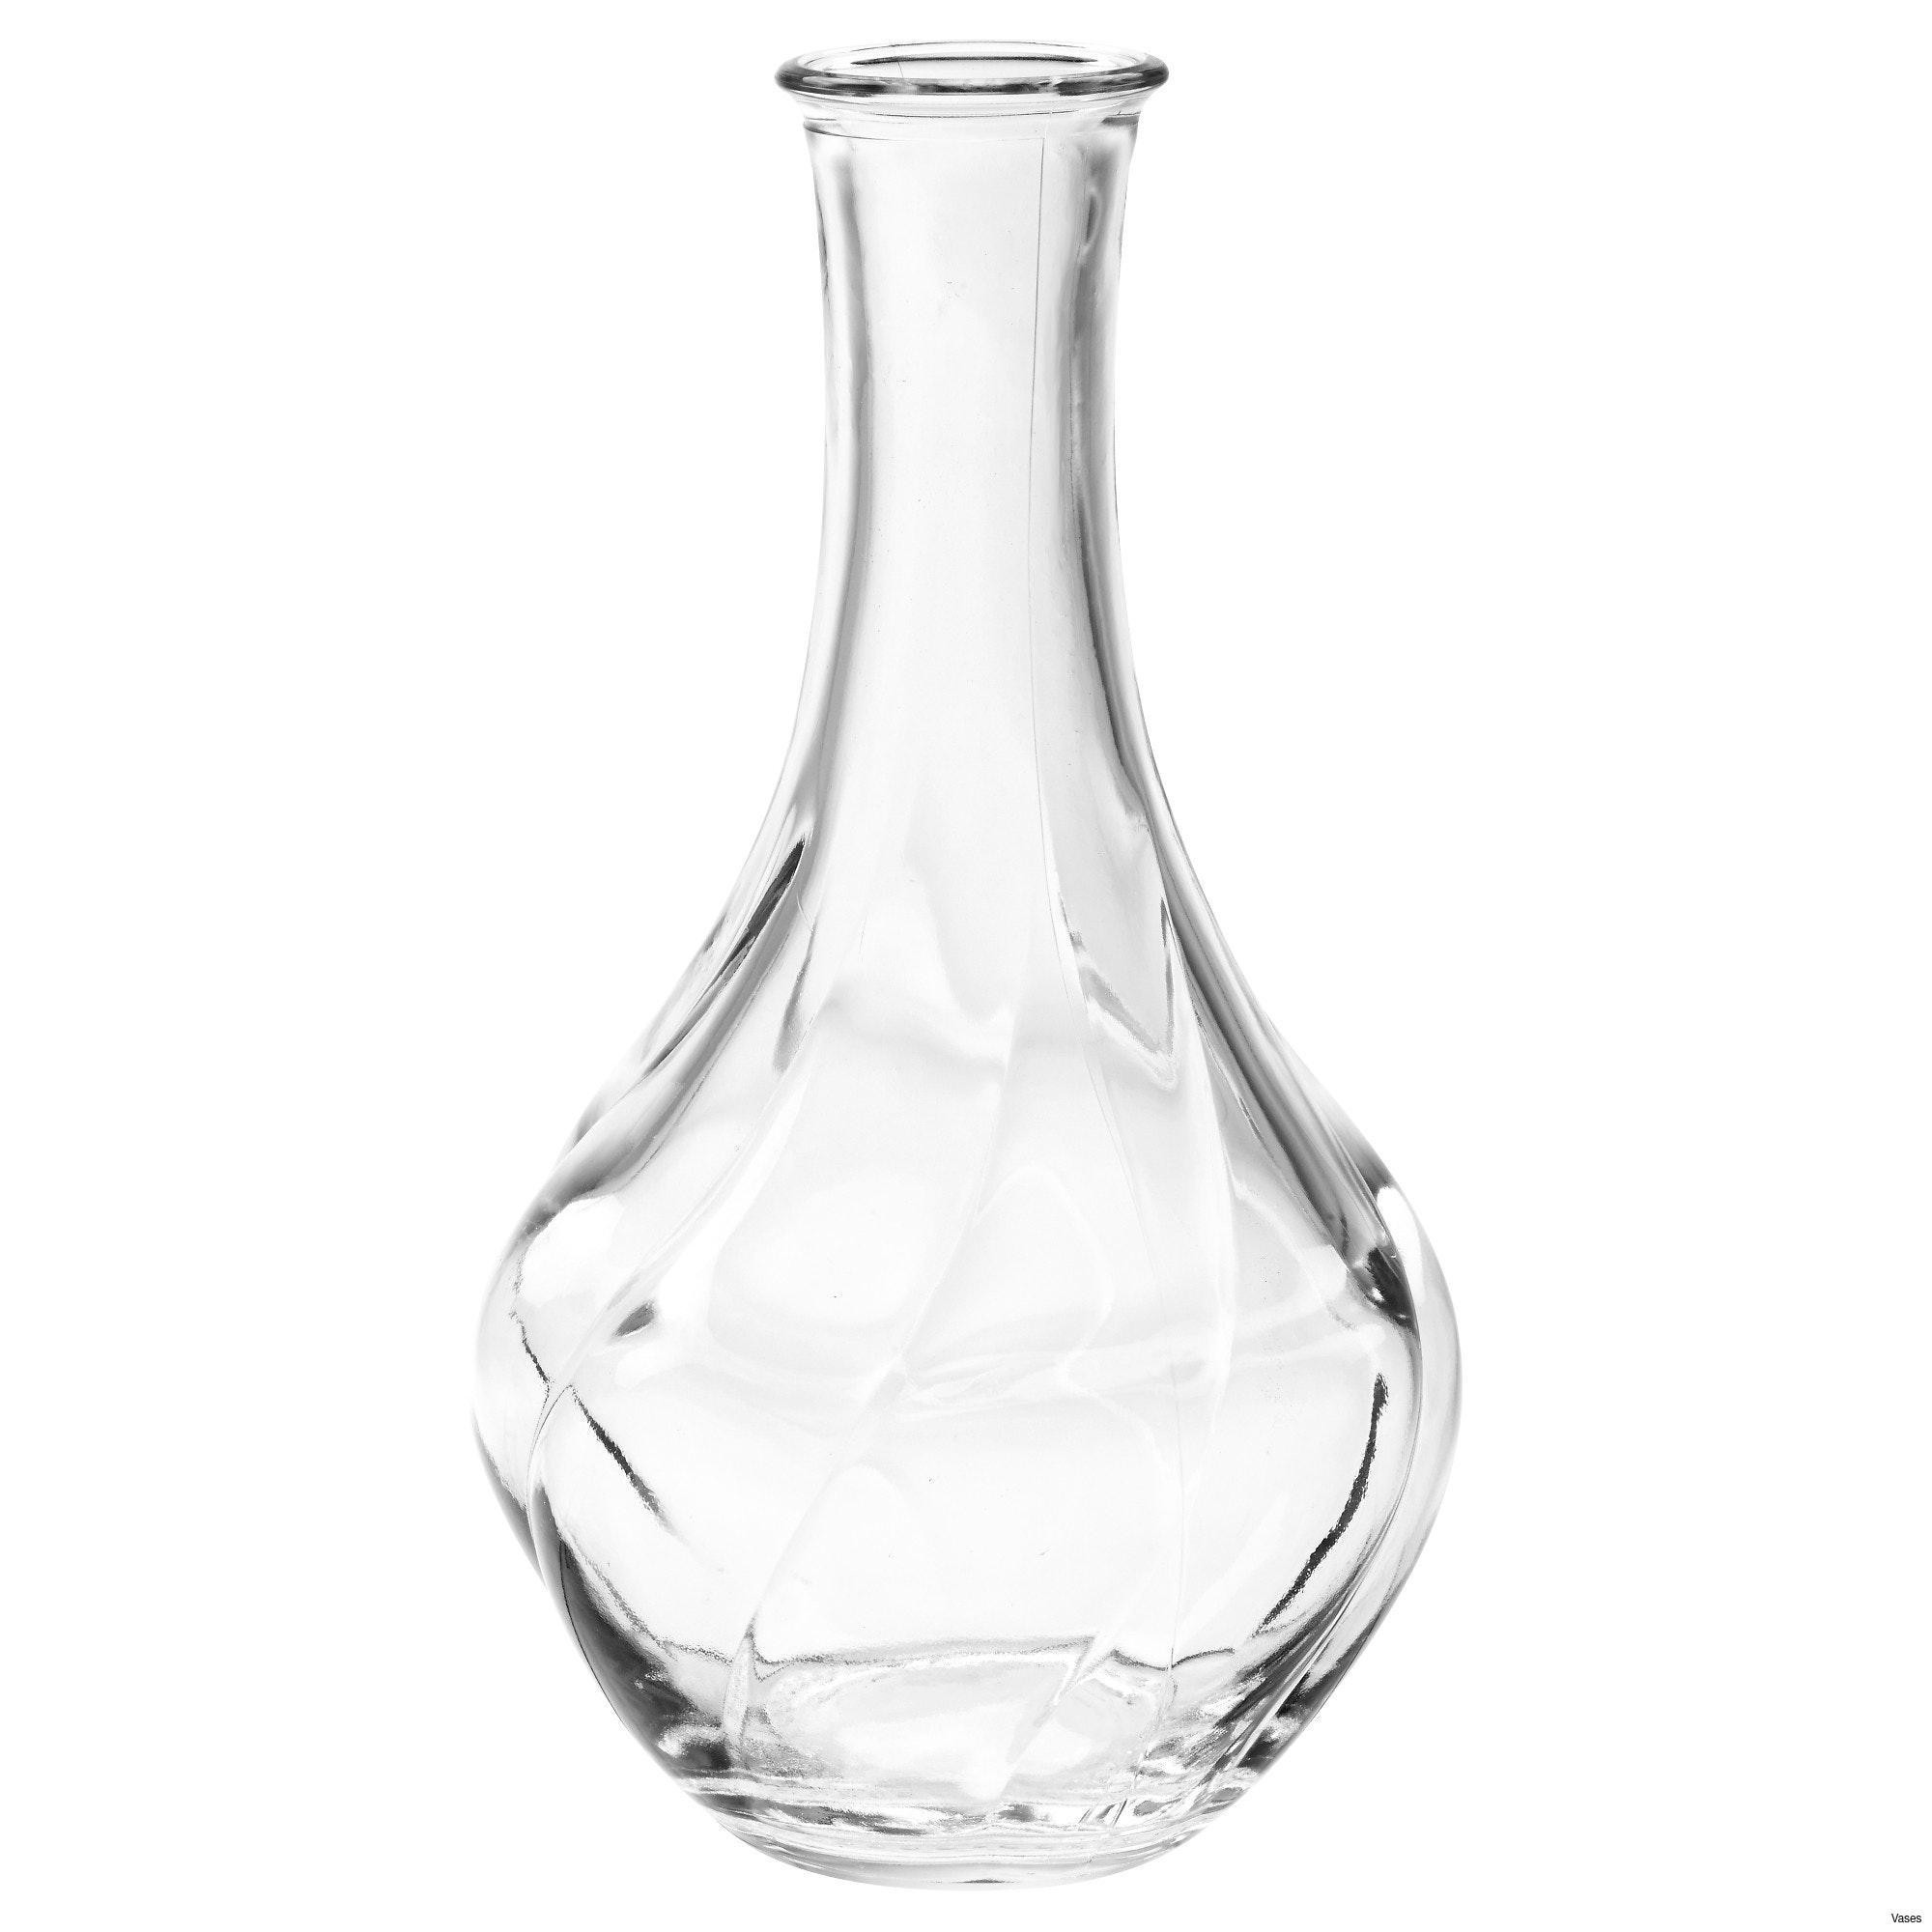 29 Cute Mercury Glass Vases Bulk 2024 free download mercury glass vases bulk of extra large glass vase image living room glass vases fresh clear with extra large glass vase image living room glass vases fresh clear vase 0d tags amazing and